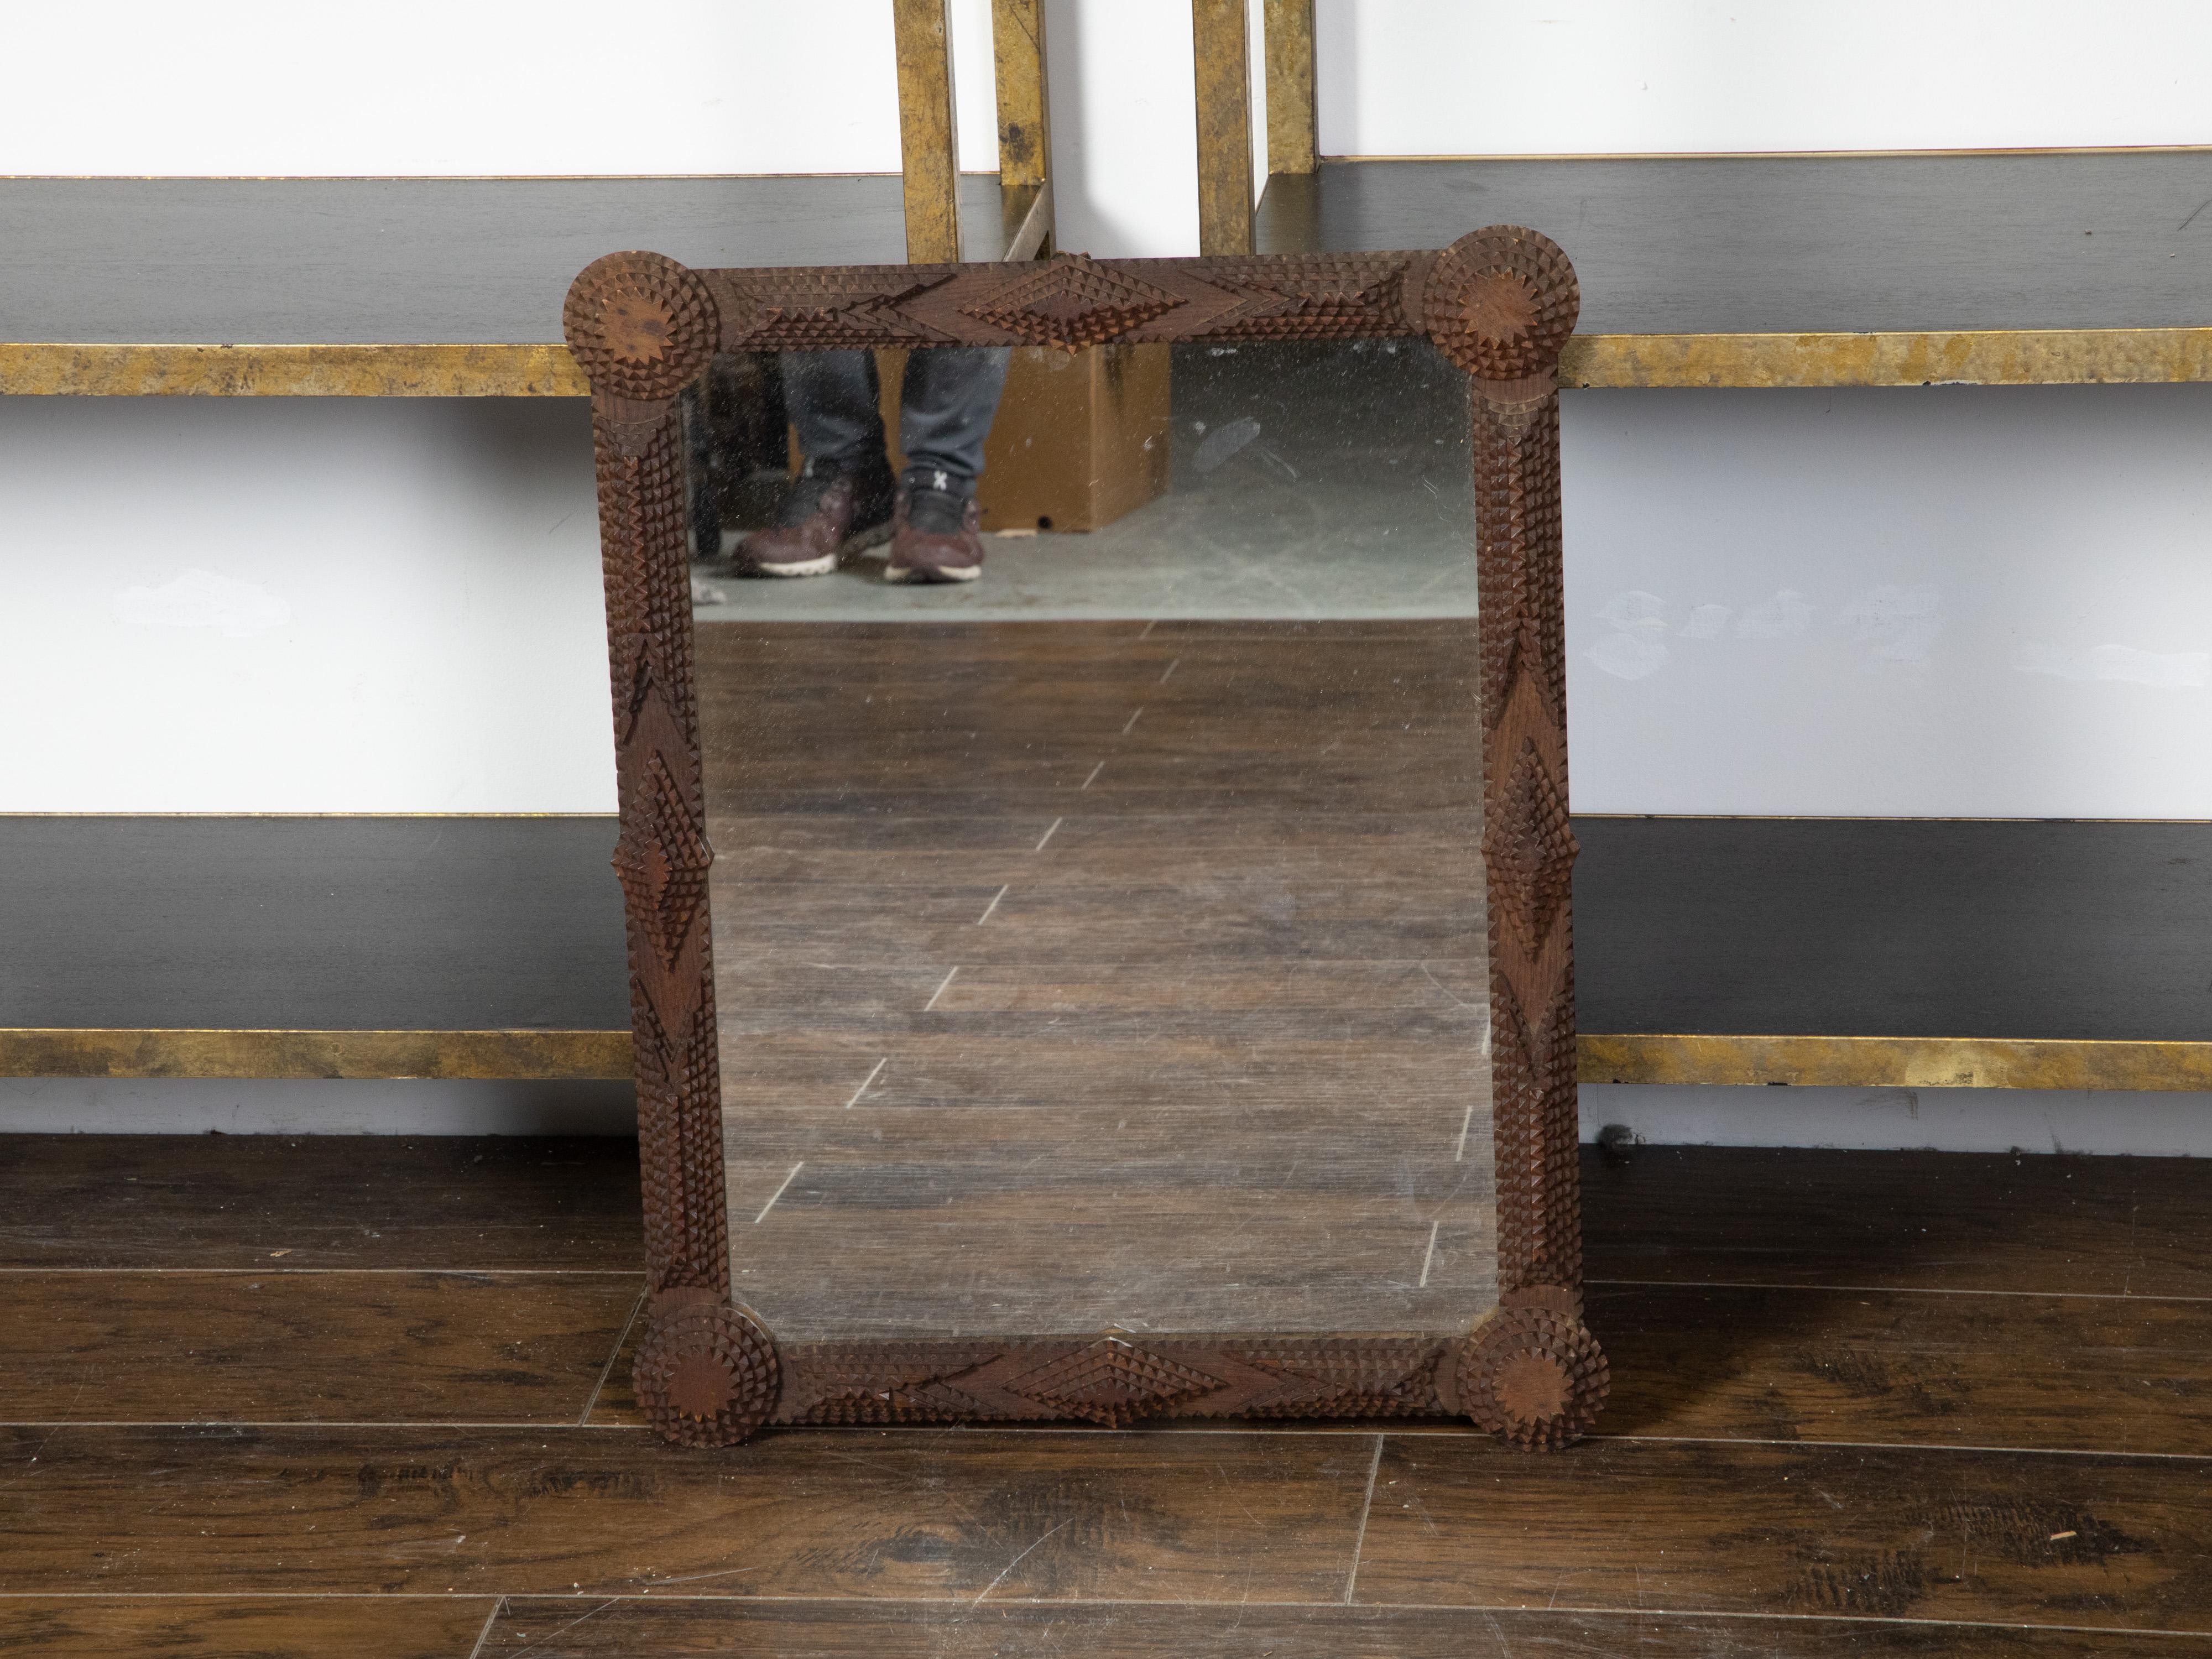 A French Tramp Art hand-carved mirror from the Turn of the century, with rounded corners and pyramidal raised motifs. Created in France during the early years of the 20th century, this wall mirror was hand carved in the manner typical of the Tramp